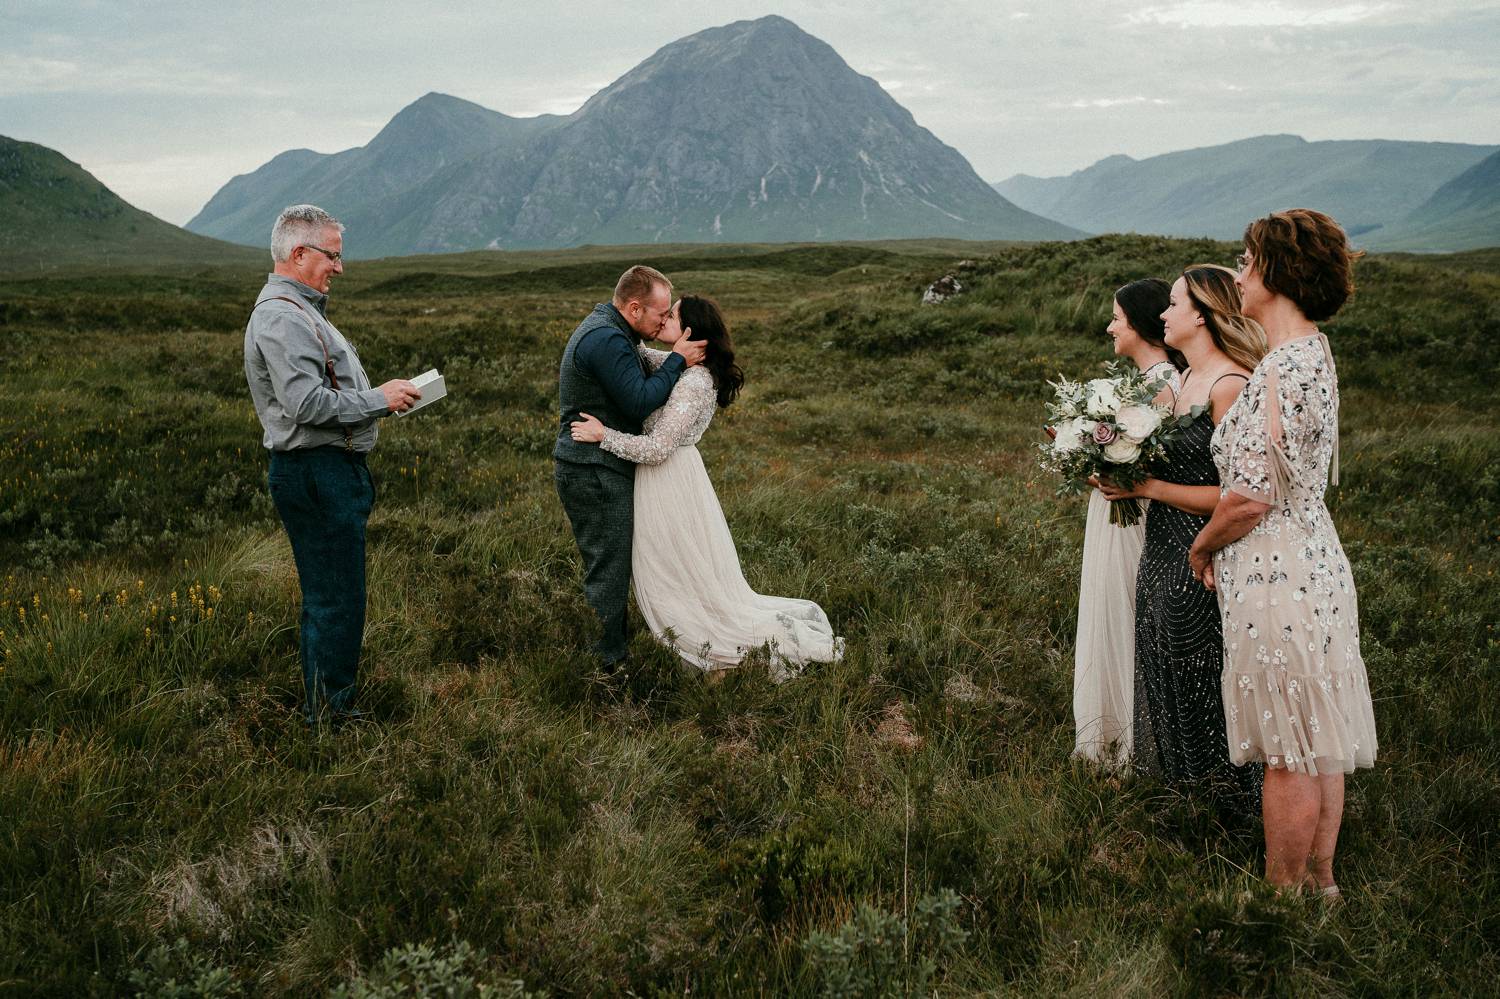 A bride and groom elope in the grassy plains of Ireland with only their minister, three attendants, and Rob Dight, their photographer.